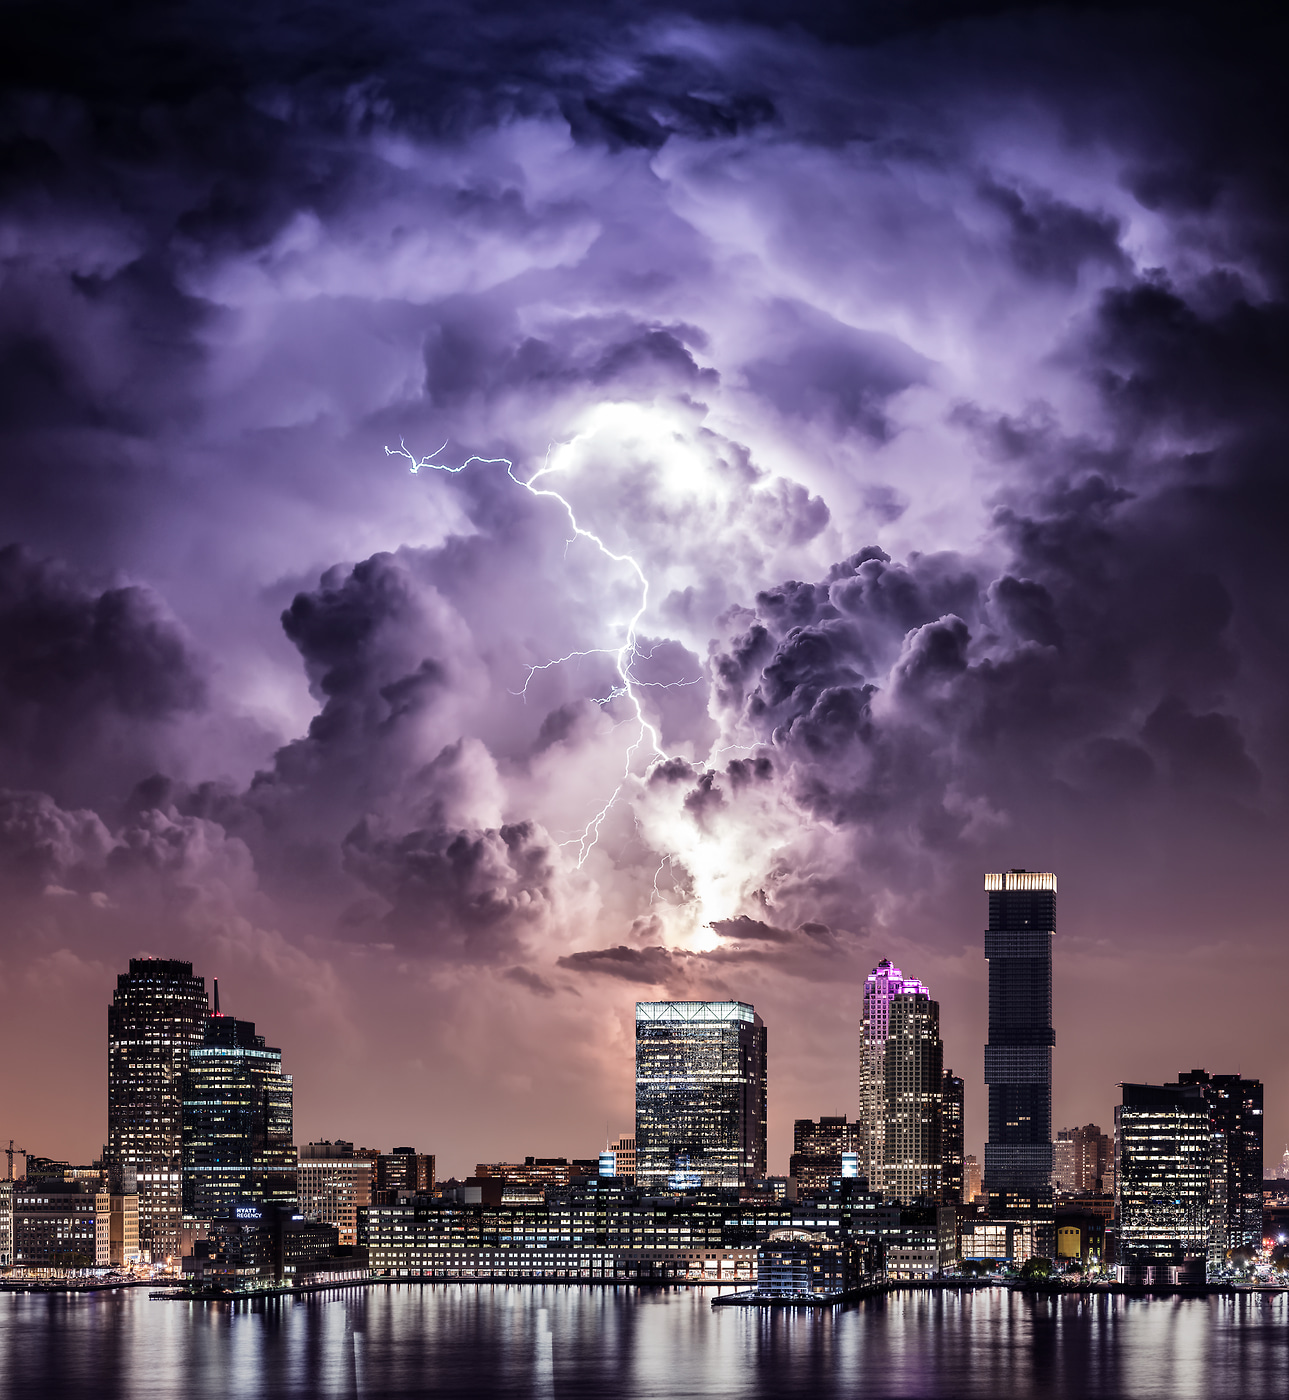 1,217 megapixels! A very high resolution, large-format VAST photo print of a lightning bolt strike from a thunderstorm in Jersey City, NJ over URL Harborside 1; created by Dan Piech.